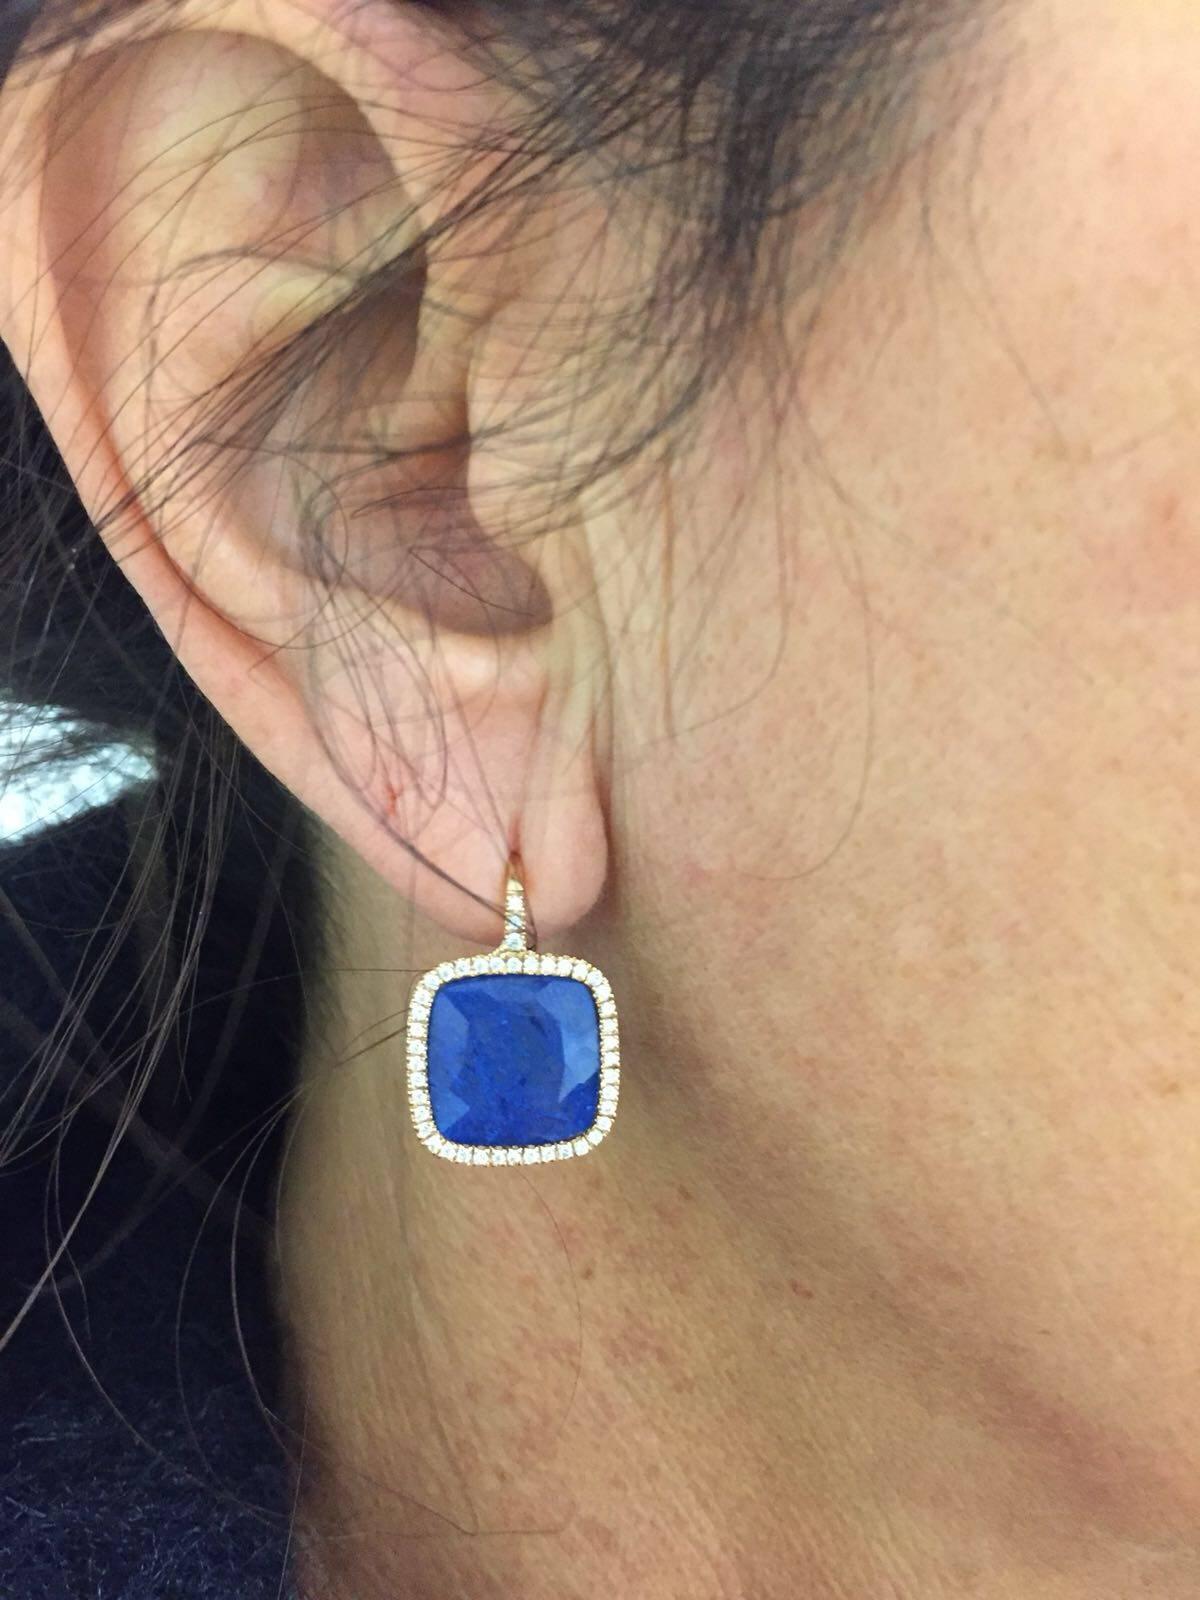 Sliced Sapphire cushion shape earrings, these have an amazing look on the ear.
They are made in Italy and are 18k white gold.
The diamonds surrounding the sapphire frame the royal blue color.
Diamond weight 0.38
